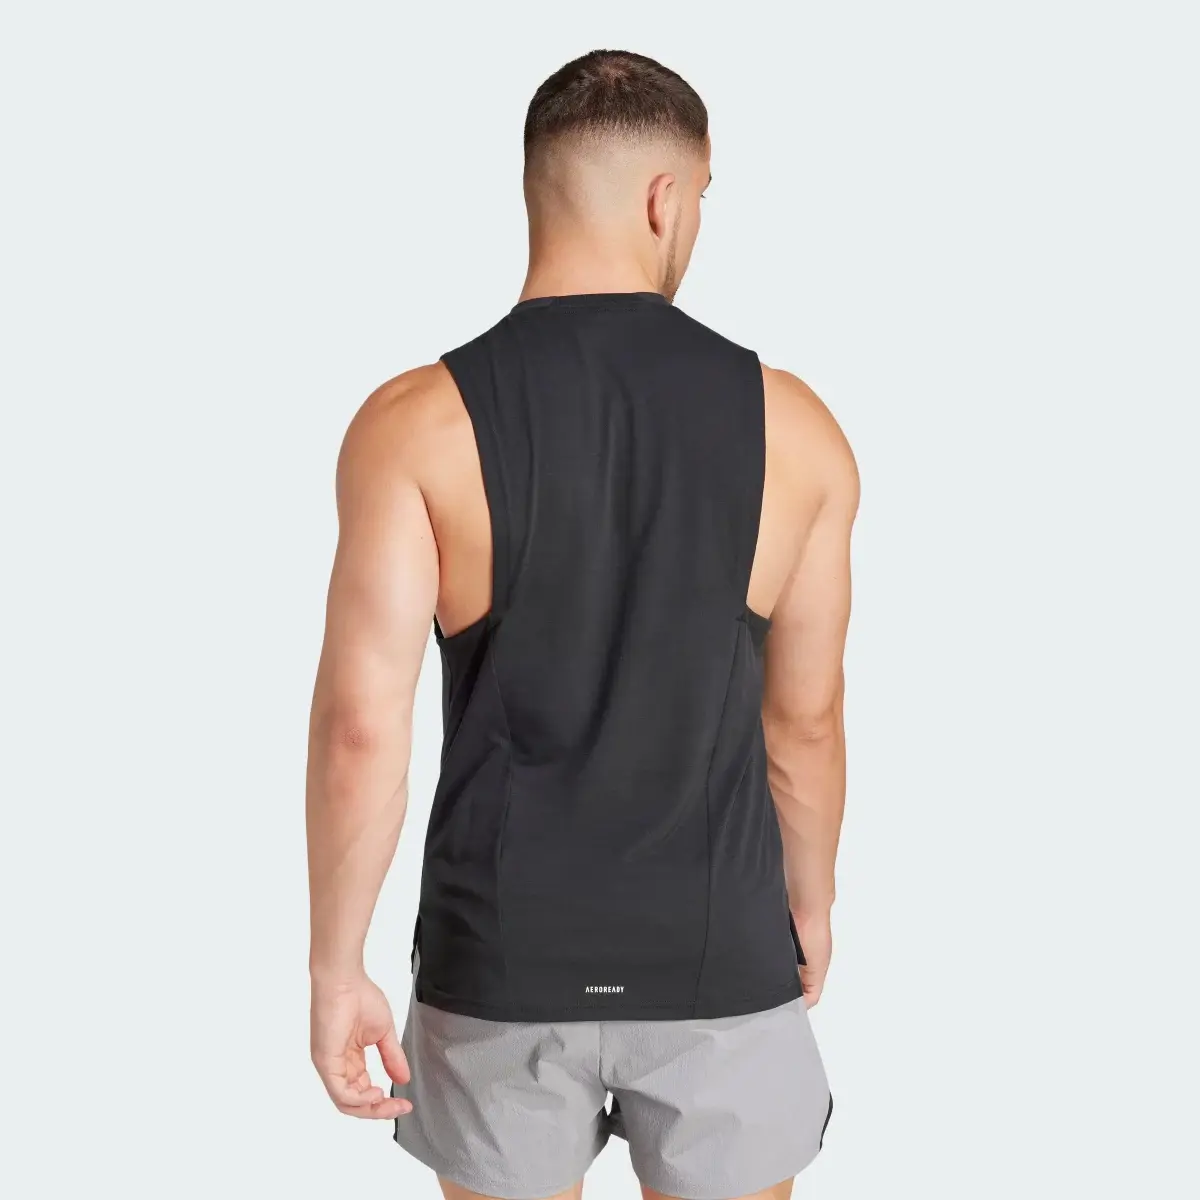 Adidas Designed for Training Workout Tanktop. 3